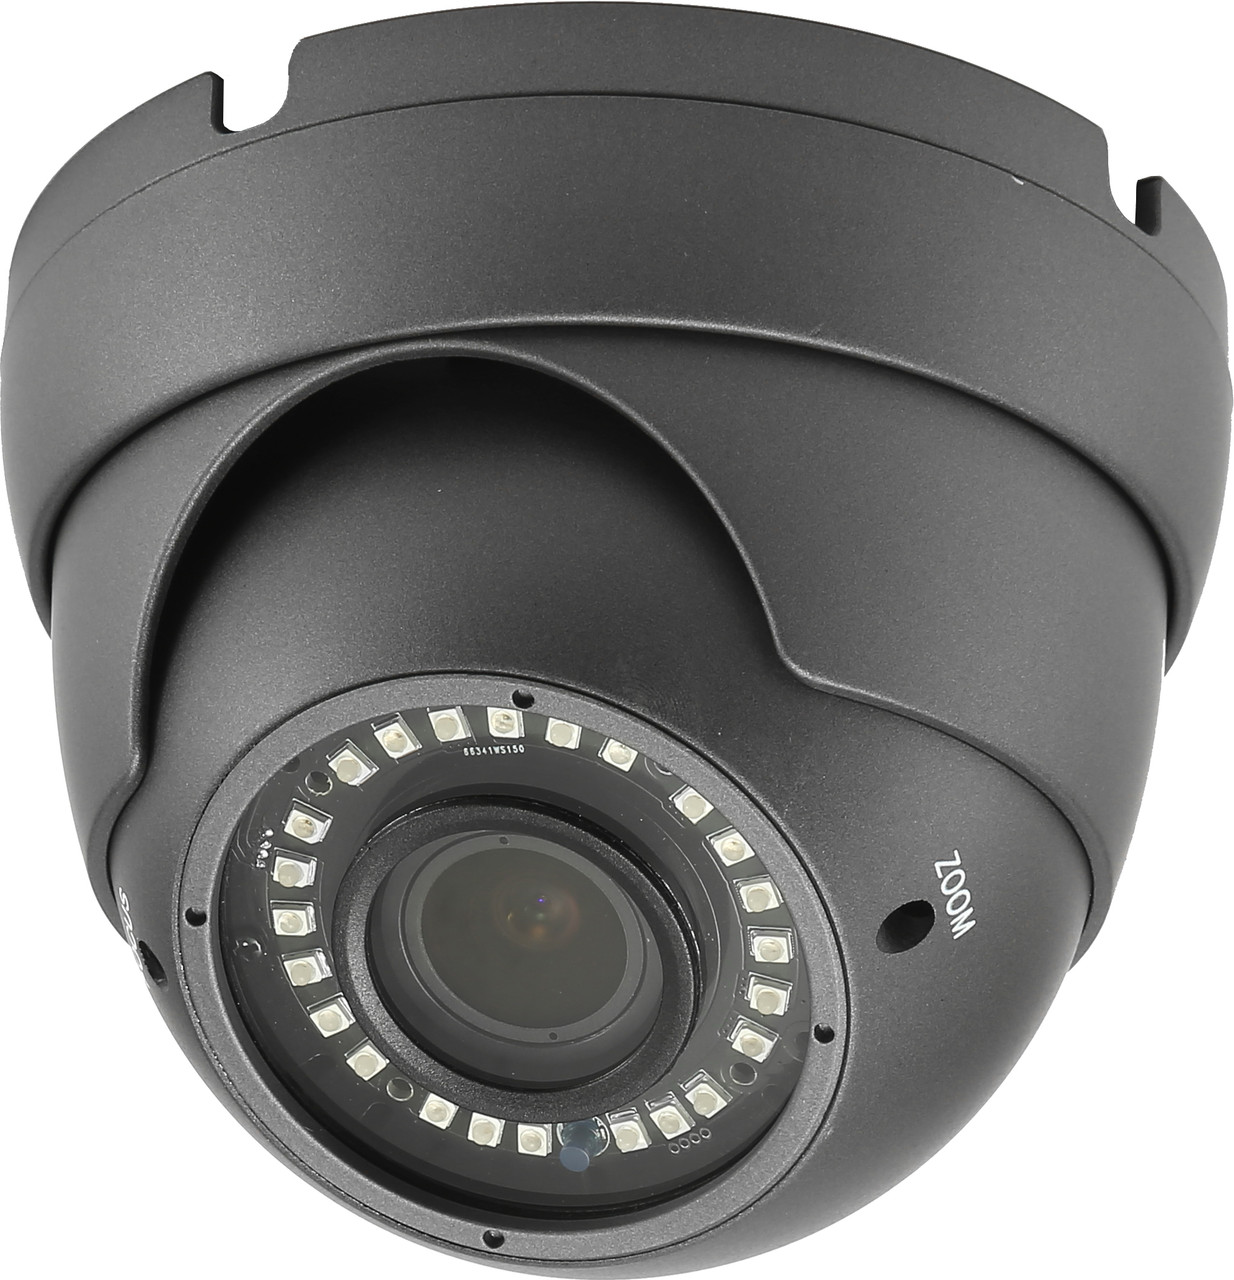 PolarisUSA 1/2.7"  5MP Motorize 4-in-1 Dome Camera with IR , 5MP HDTVI, HDCVI, AHD, CVBS, 20fps@5MP, 30fps@1440P, 2.8-12mm, 24 SMD IR LEDs, IP66, 12VDC, Charcoal Grey